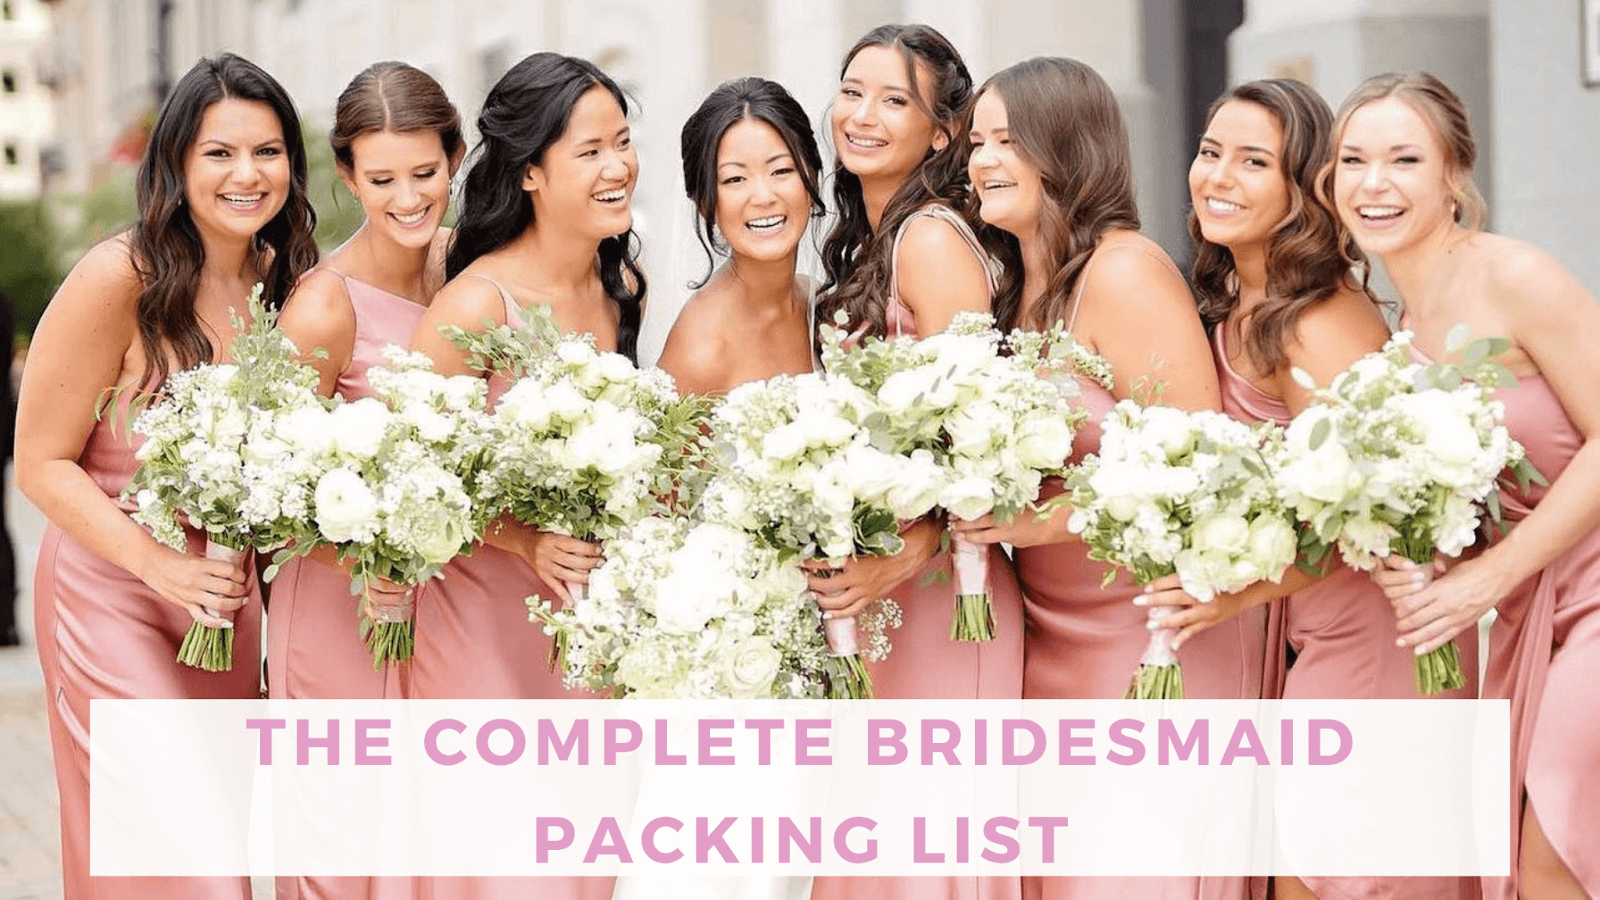 Bridal Shower Versus Bachelorette Party (What's the Difference?)